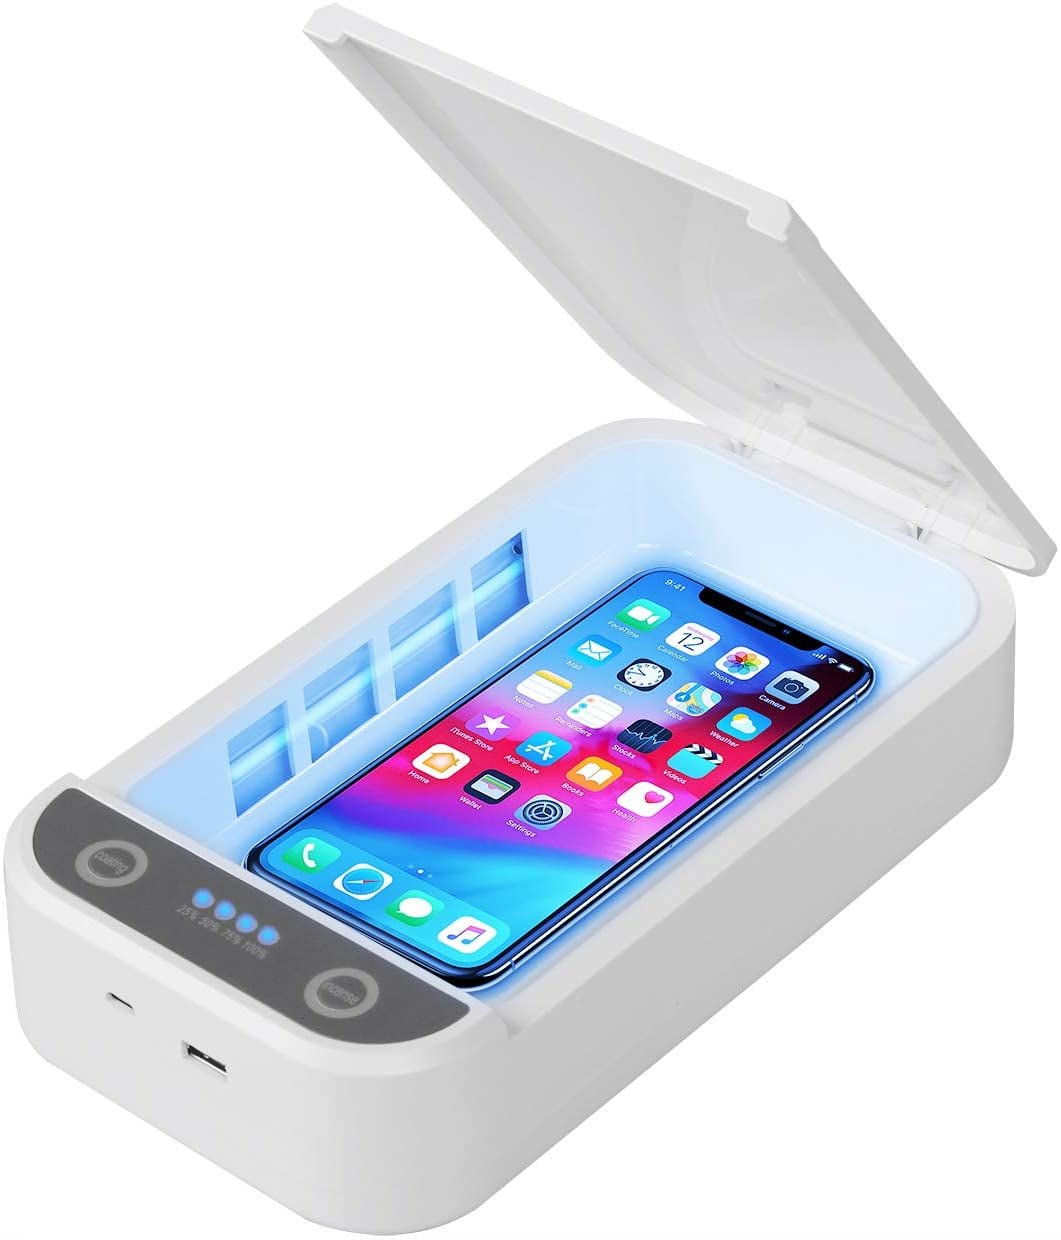 Aromatherapy Function Disinfector Portable Smart Phone Sterilizer Phone Cleaner with USB Charging for iOS Android Mobile Phone Toothbrush Pacifier UV Cell Phone Sanitizer 